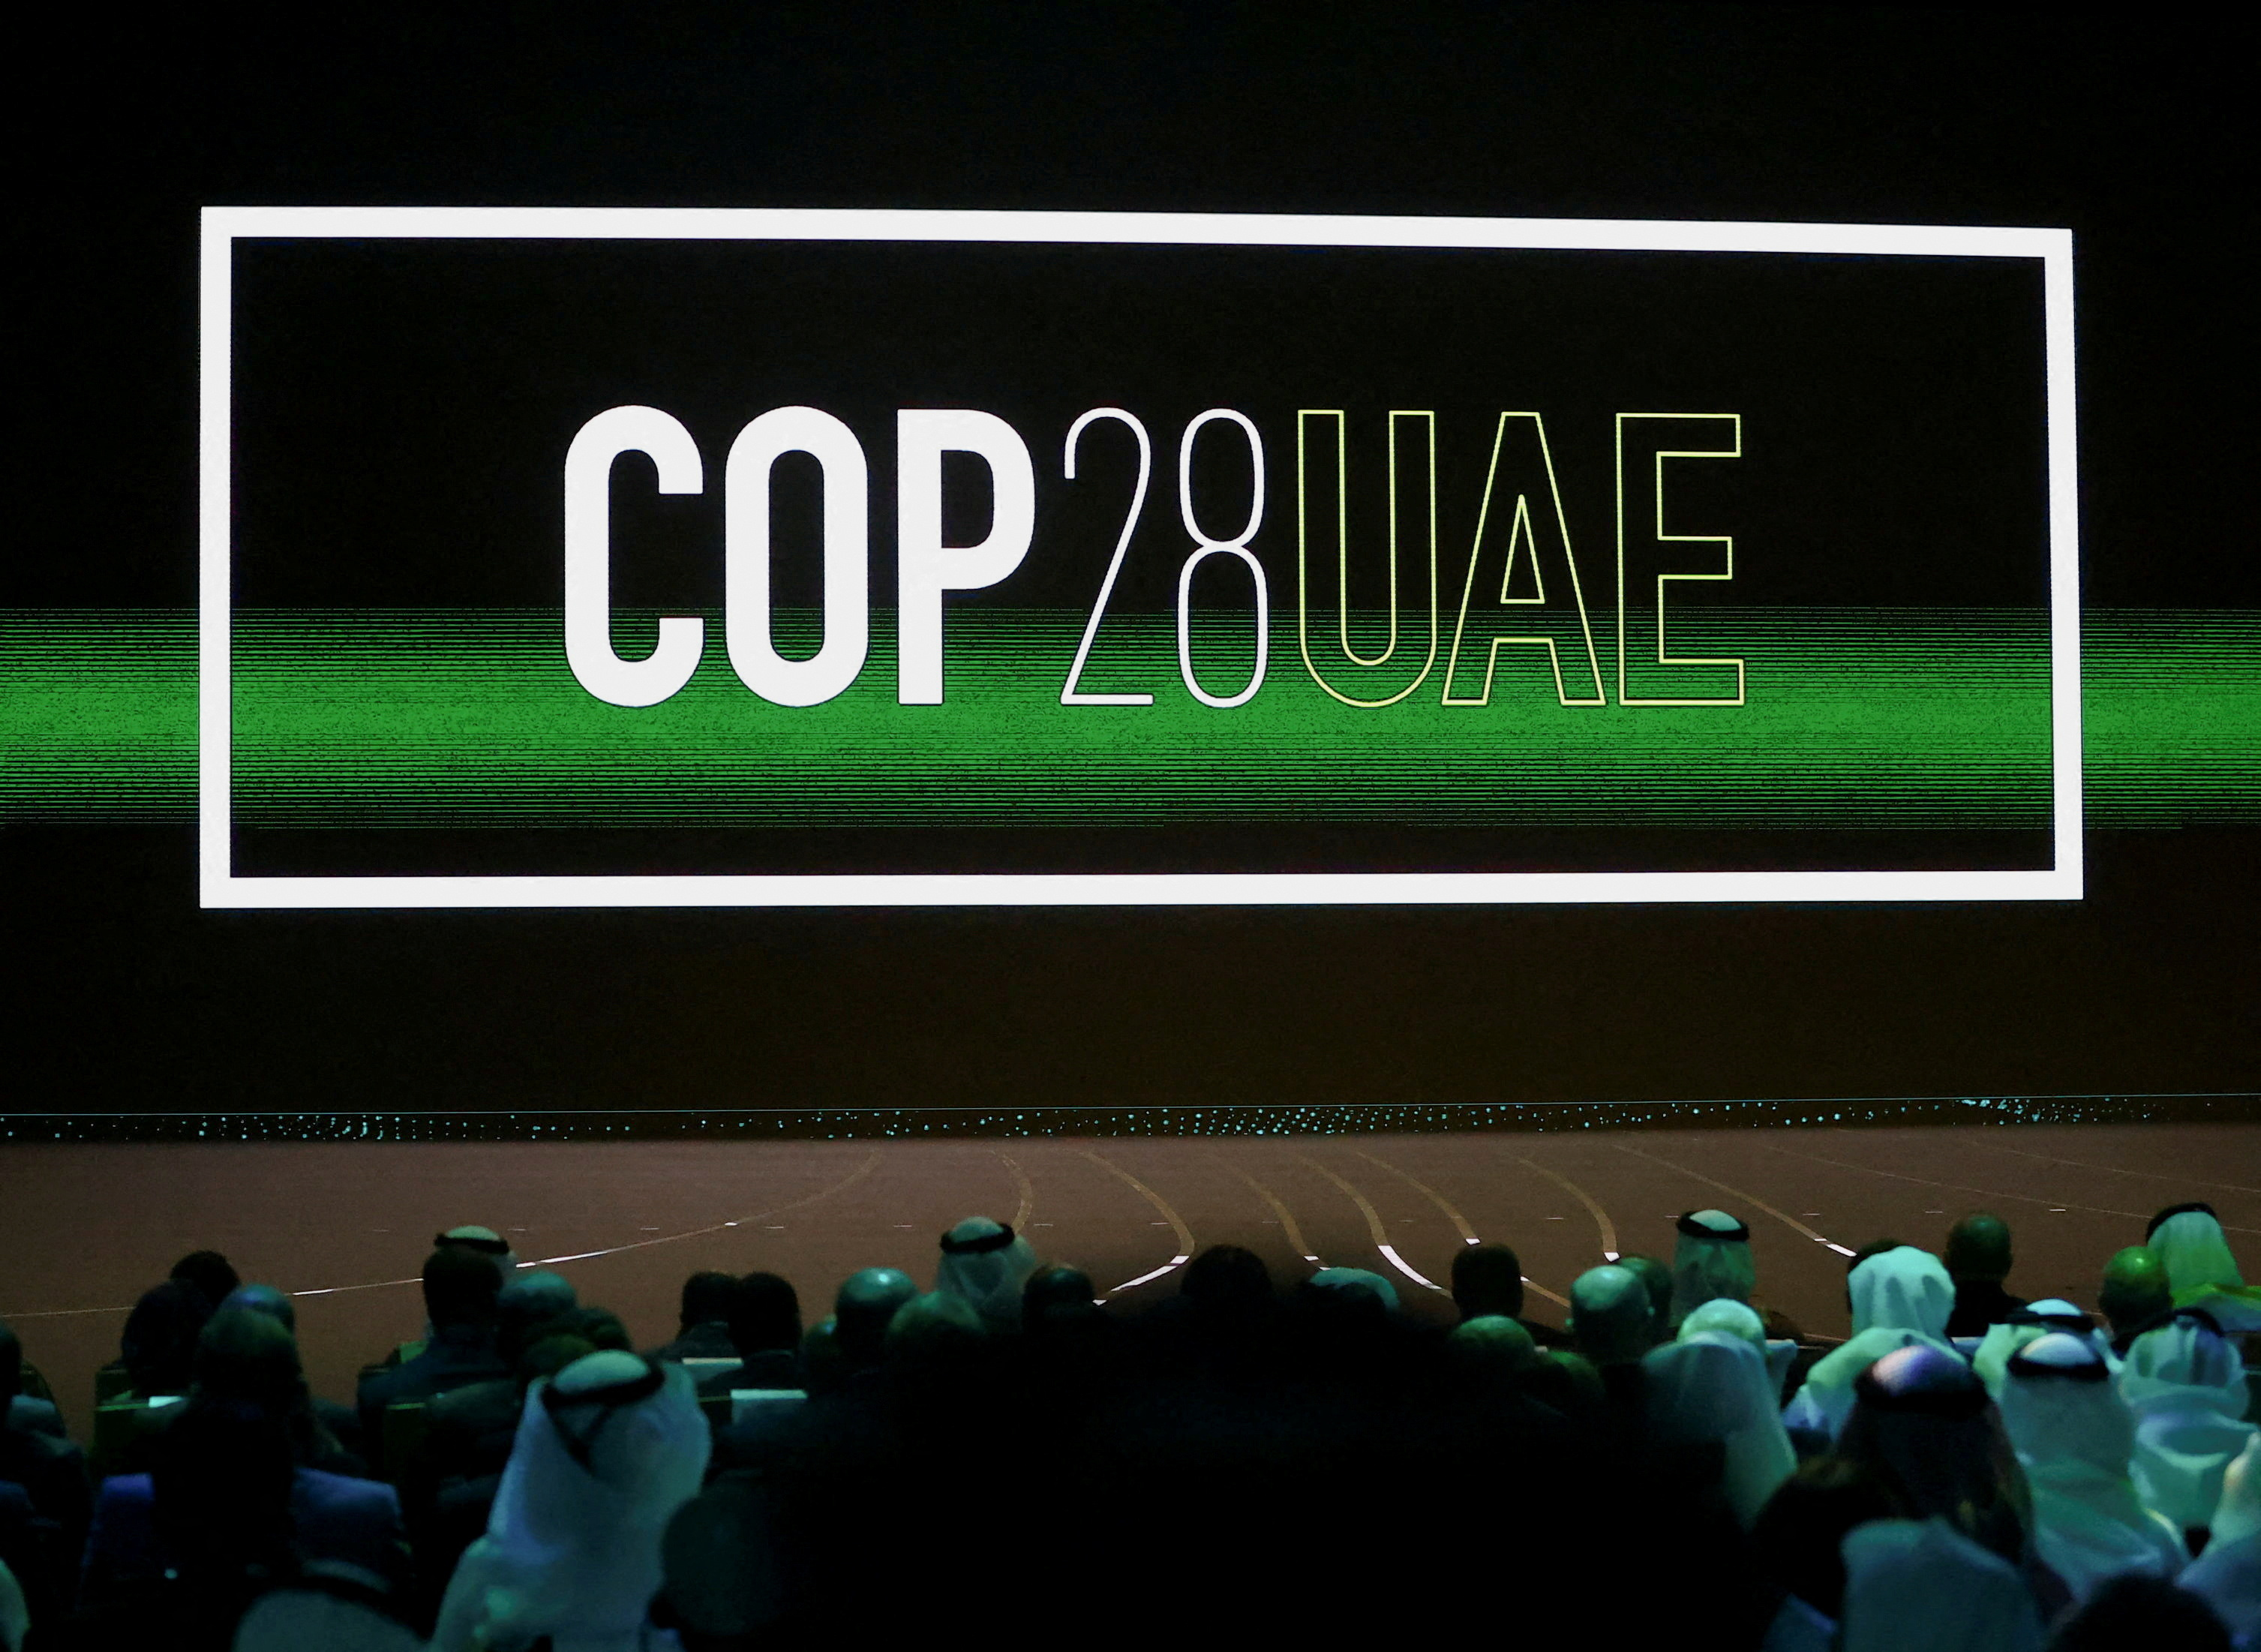 UAE says it's committed to meet CO2 emissions targets after criticism